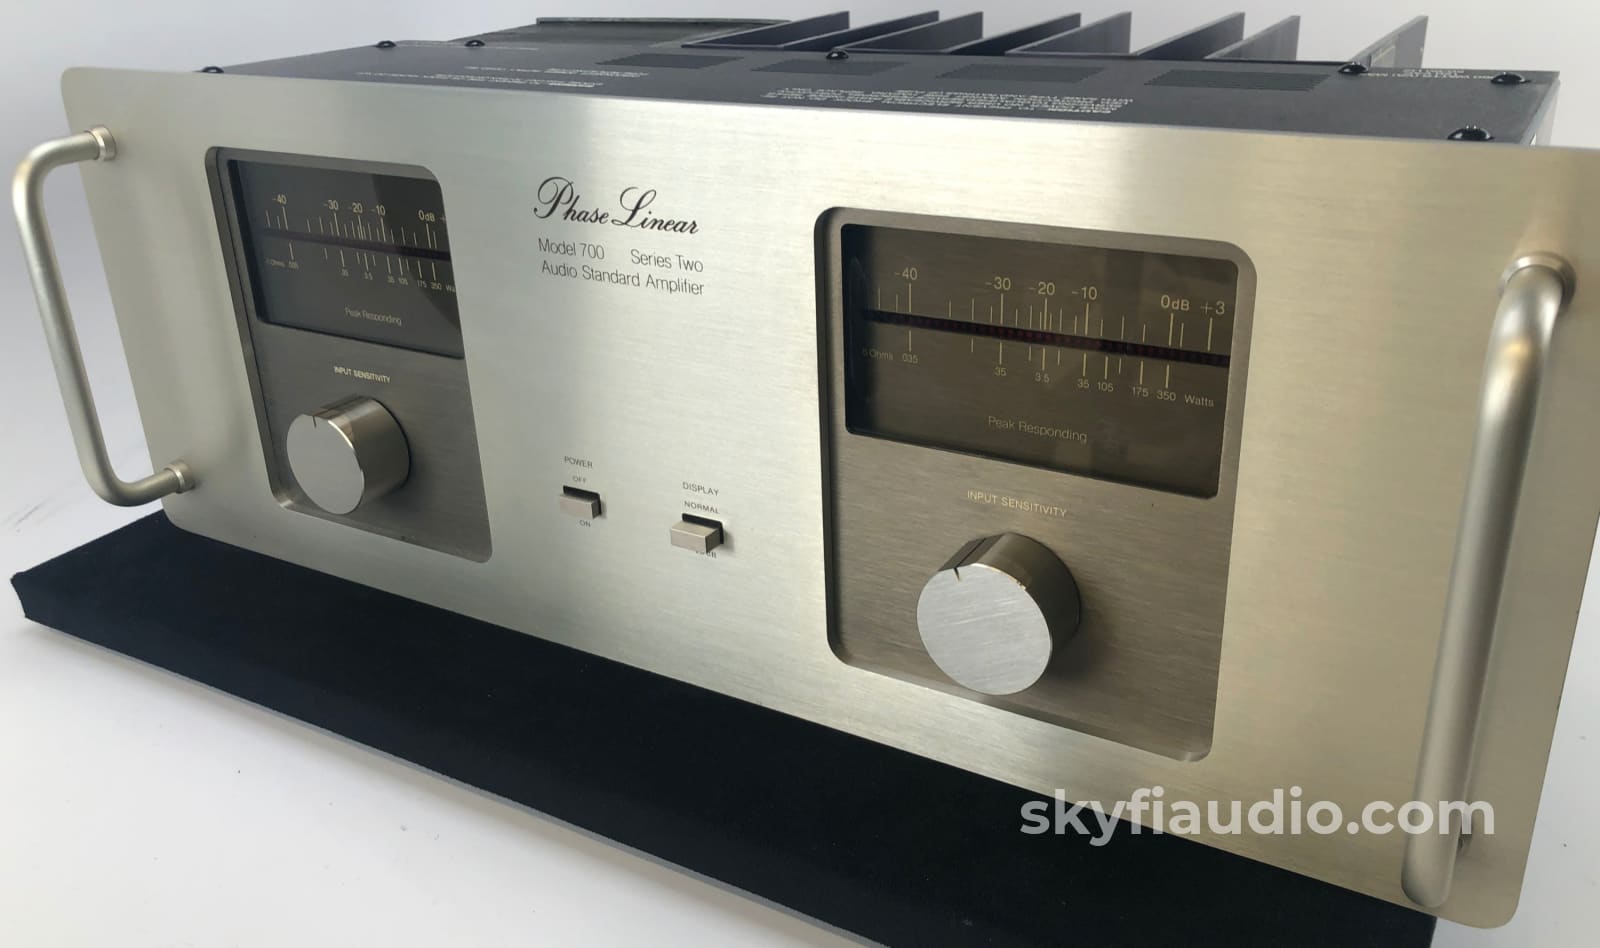 Phase Linear 700 Series Ii Amplifier - Incredibly Powerful